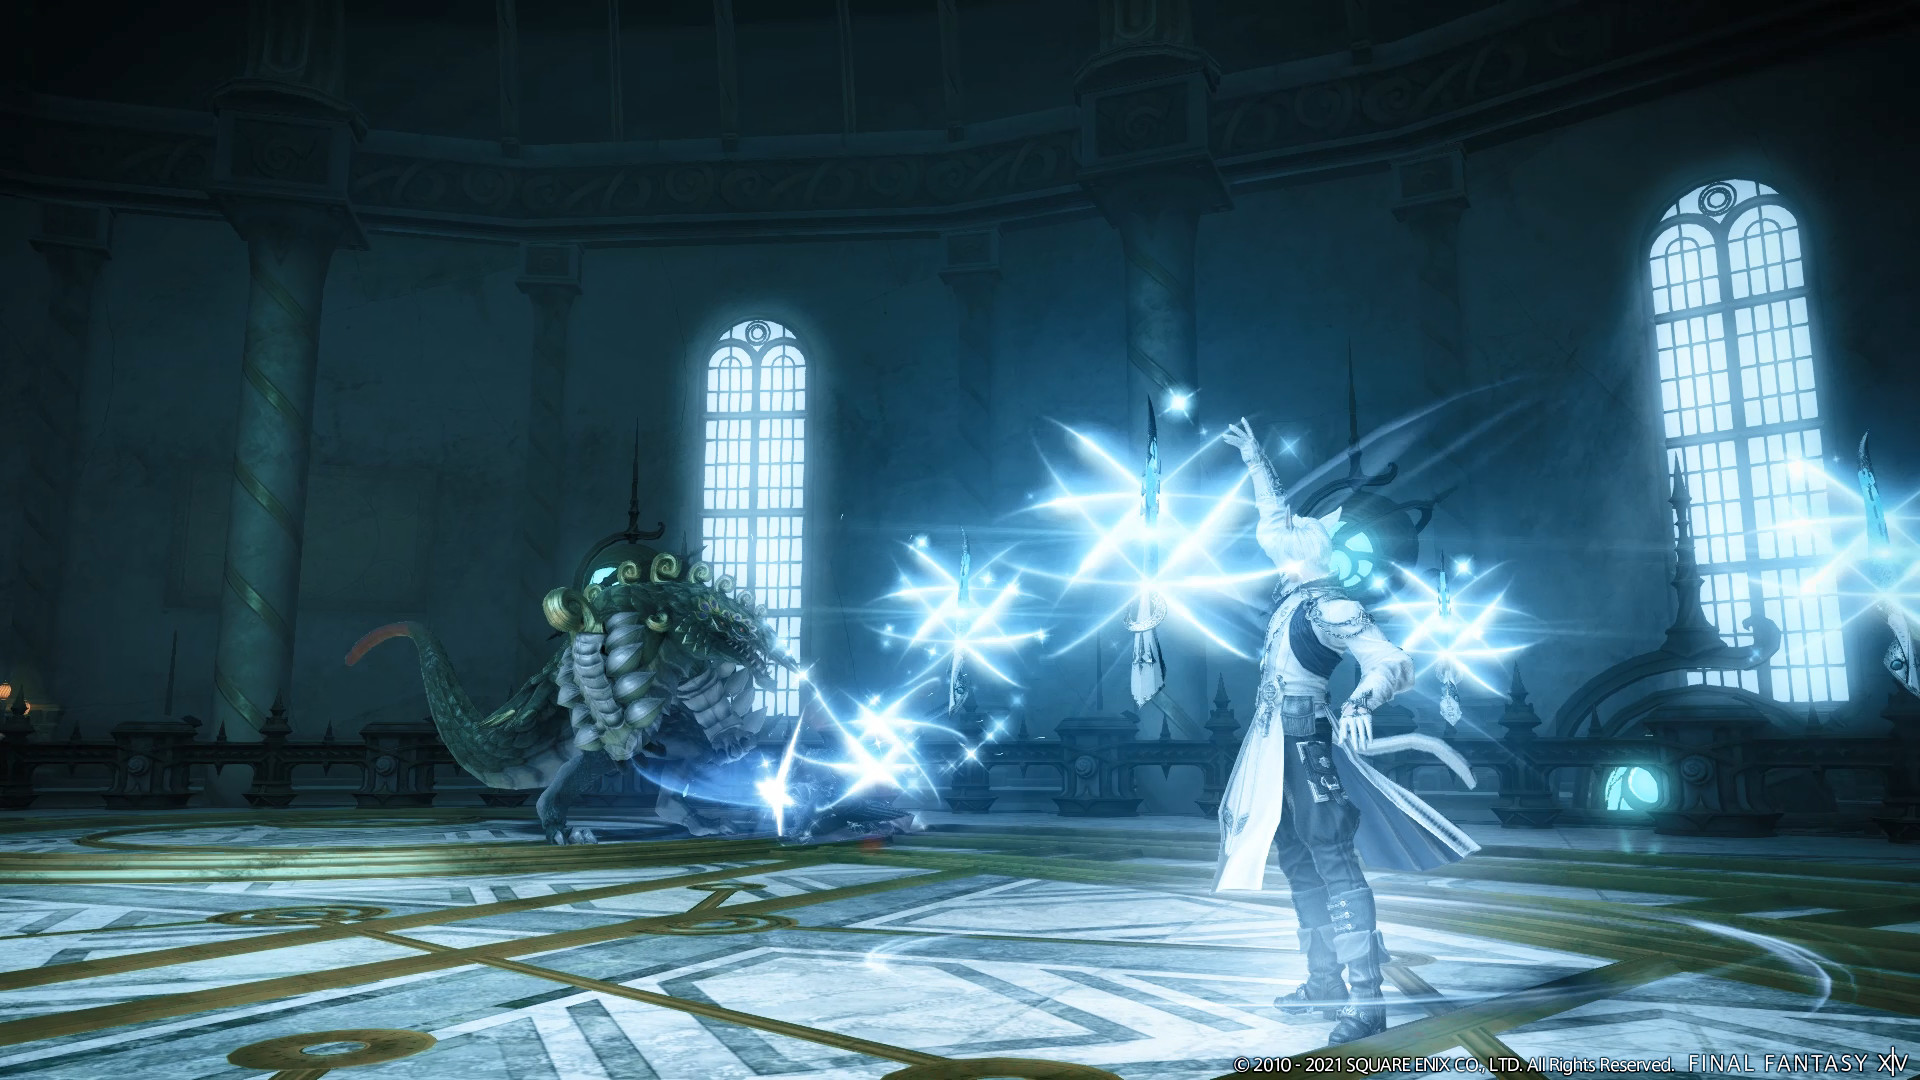 FFXIV's last pre-Endwalker Live Letter details crafting and PvP updates – here's when to watch